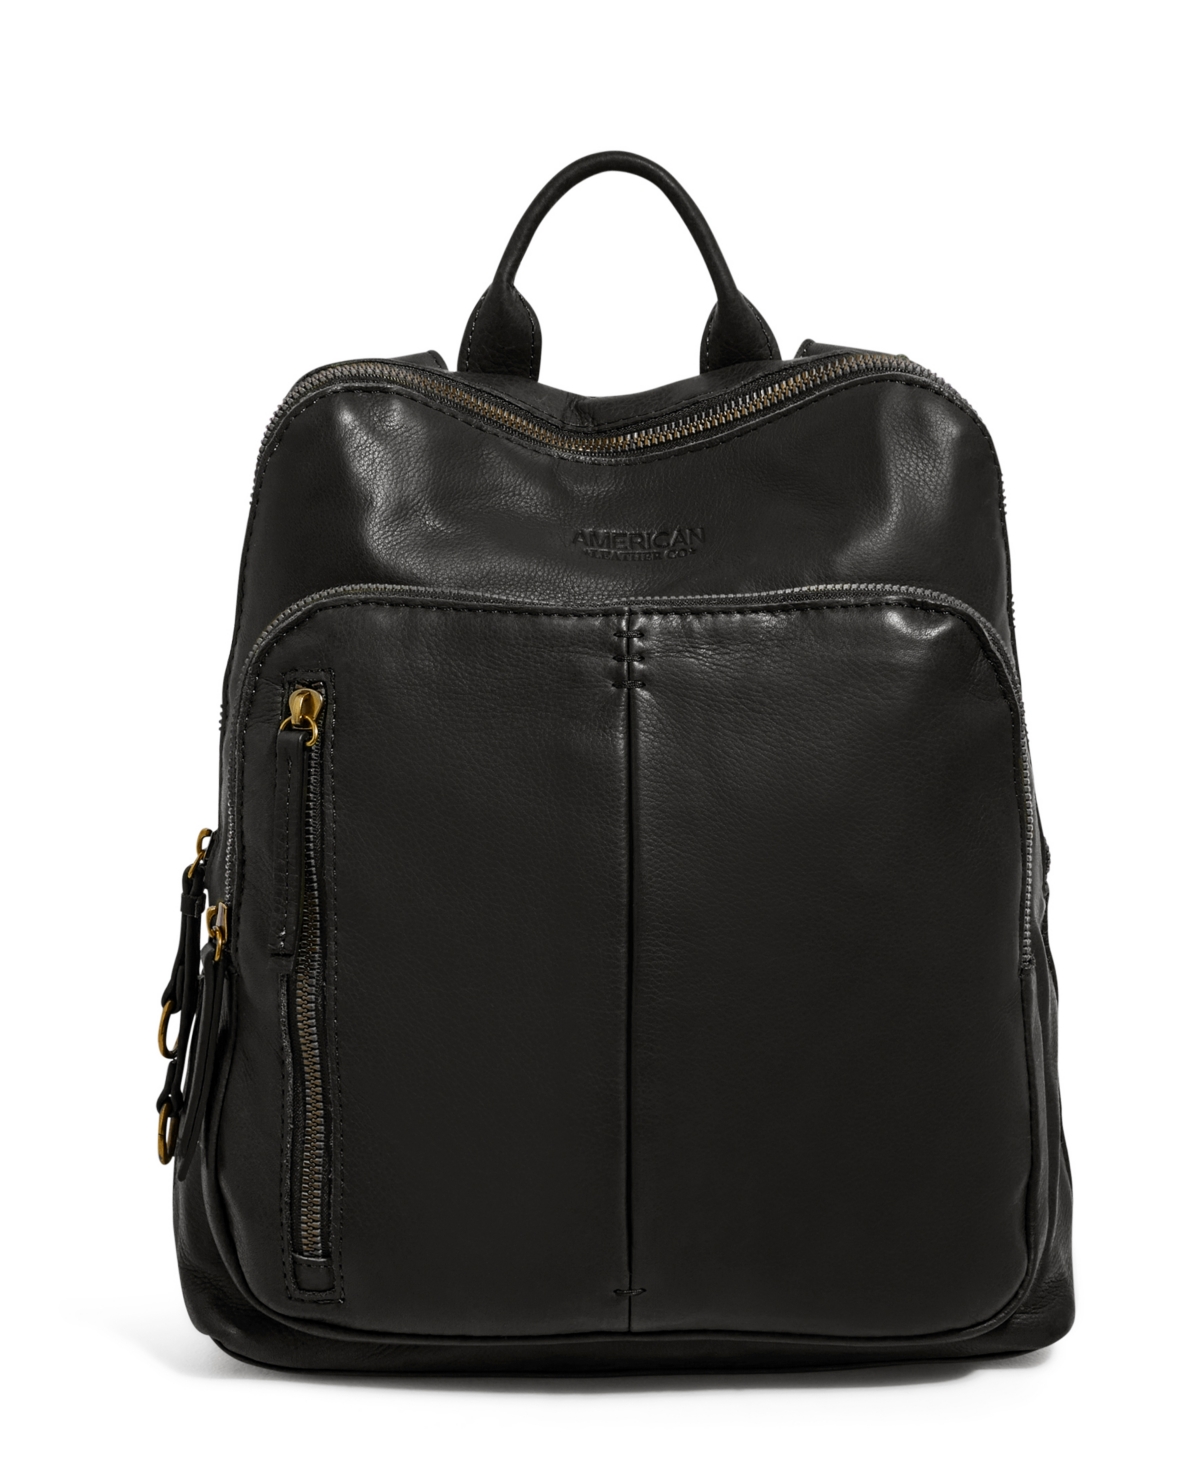 Cleveland Backpack - Brandy Smo